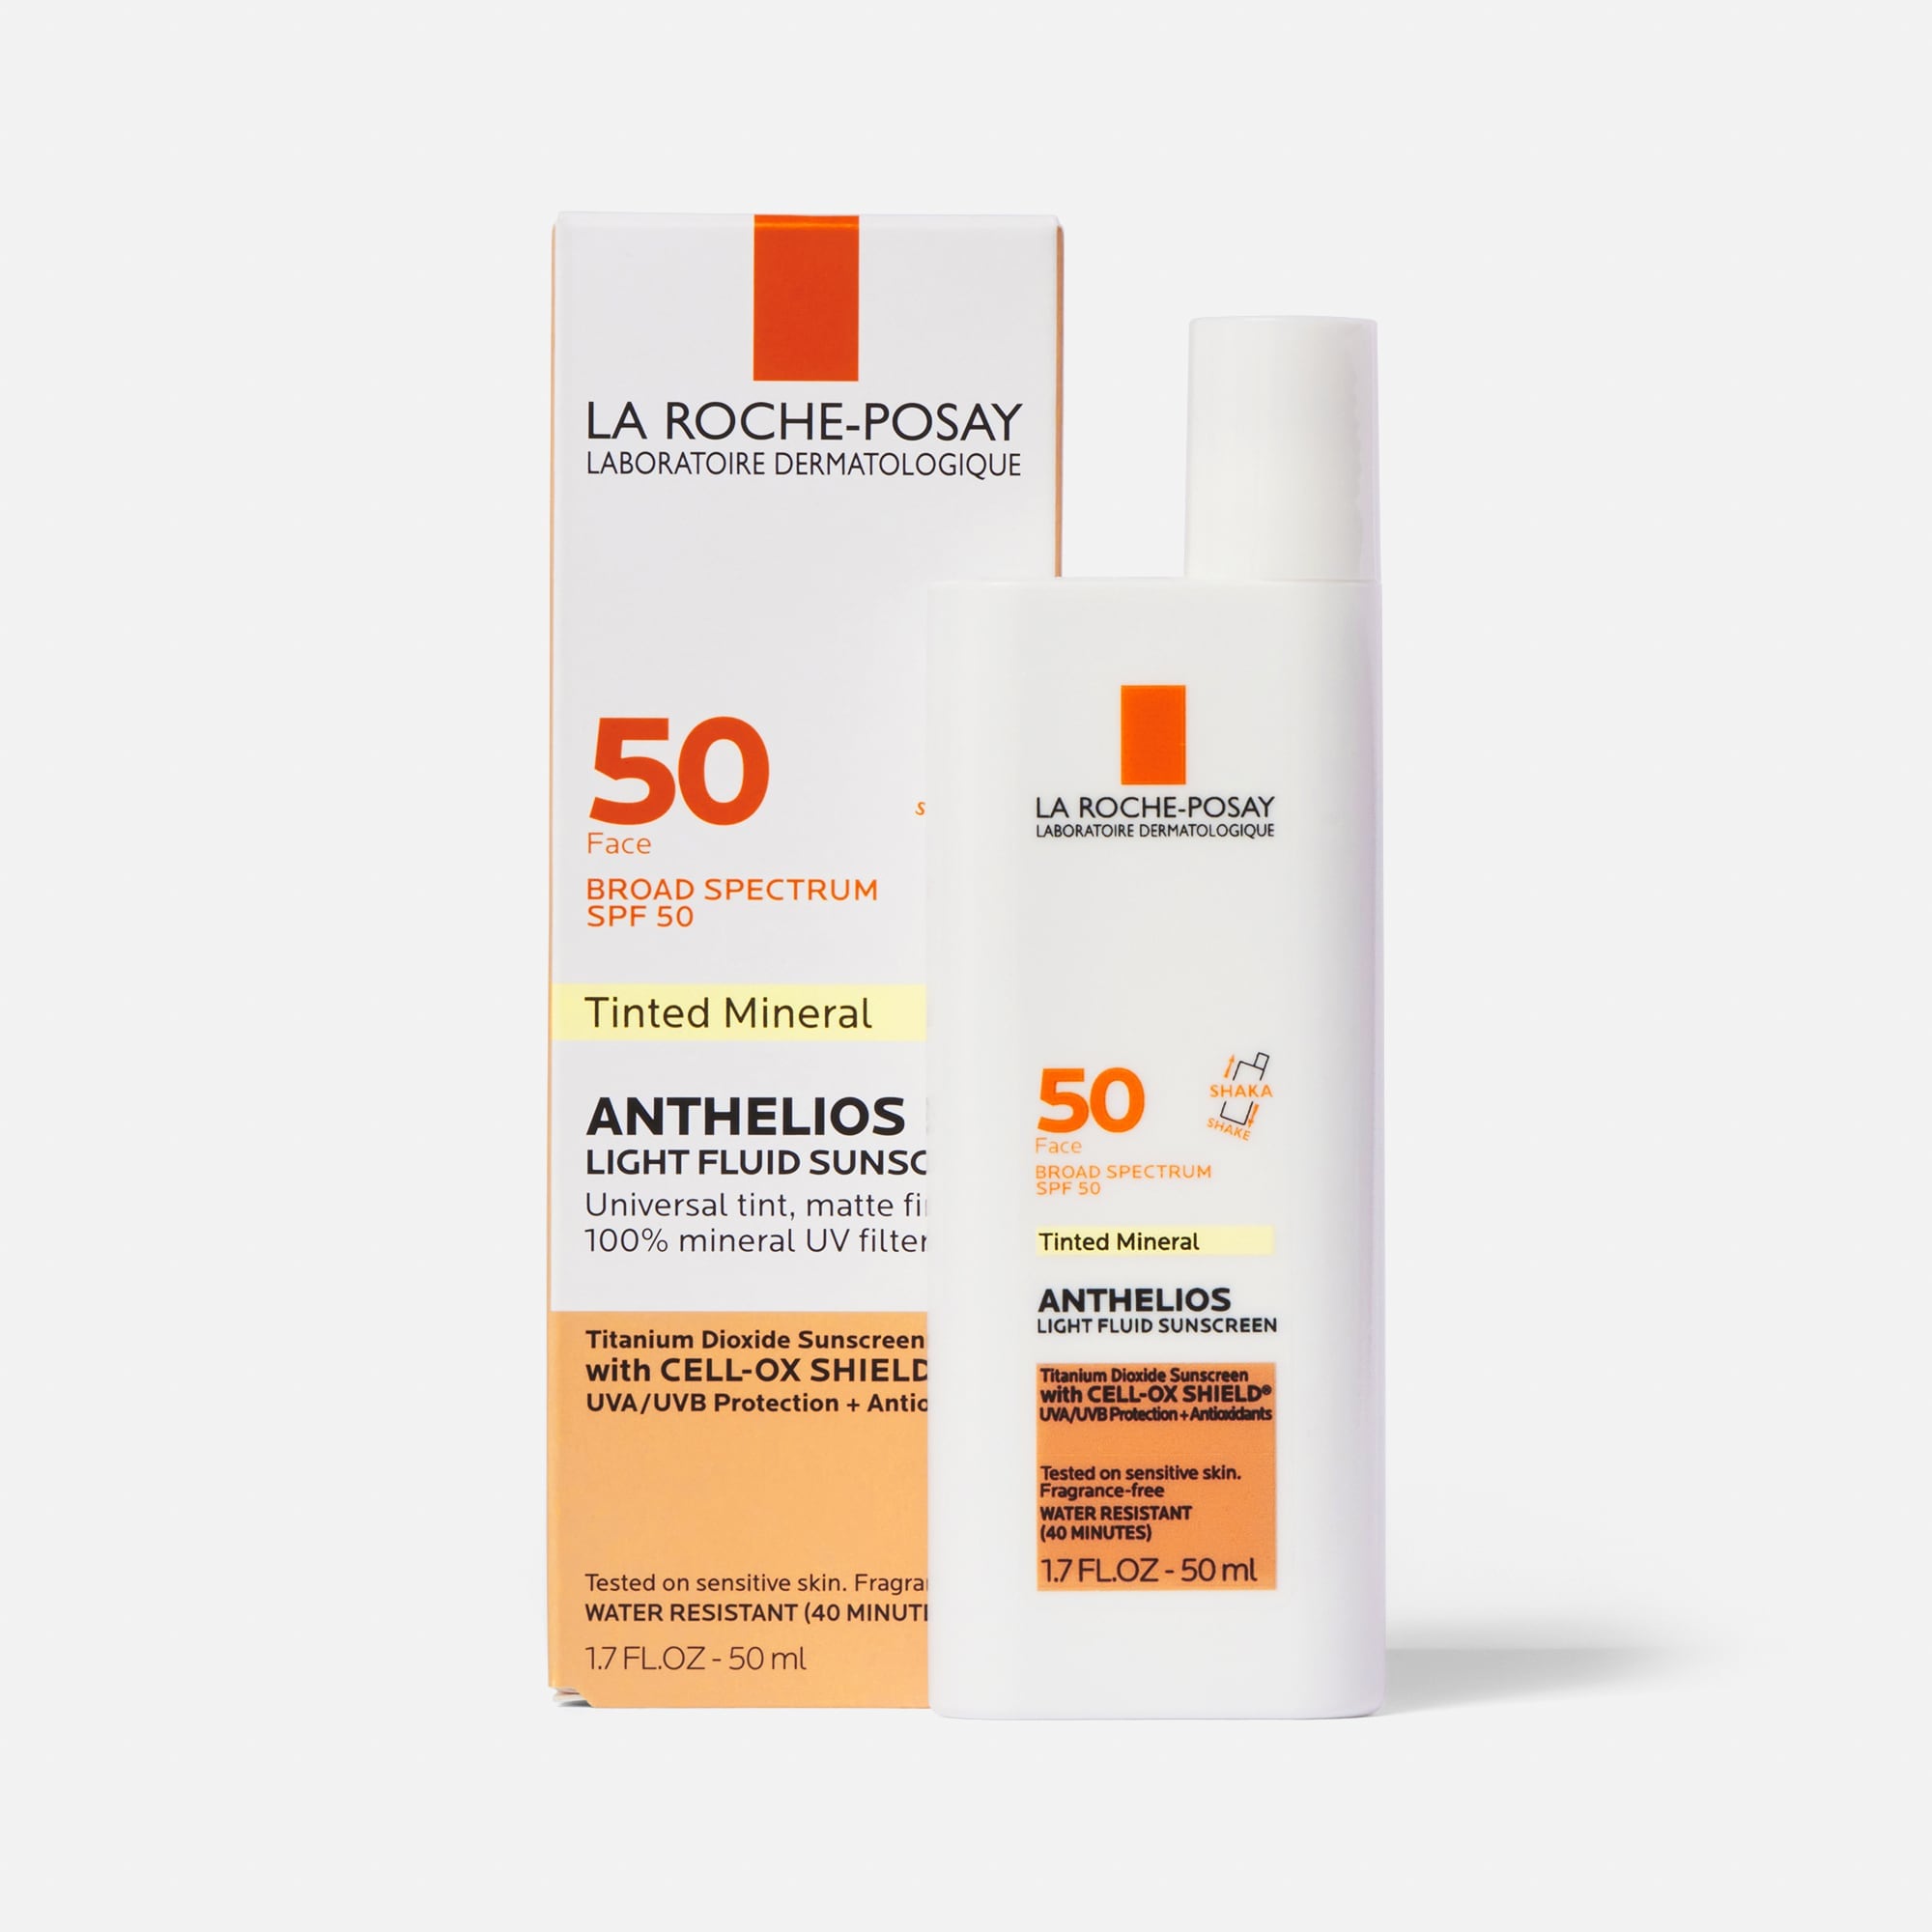 La Roche-Posay 50 Mineral Sunscreen Tinted for Face, Ultra-Light Fluid SPF 50 with Antioxidants, 1.7 oz.